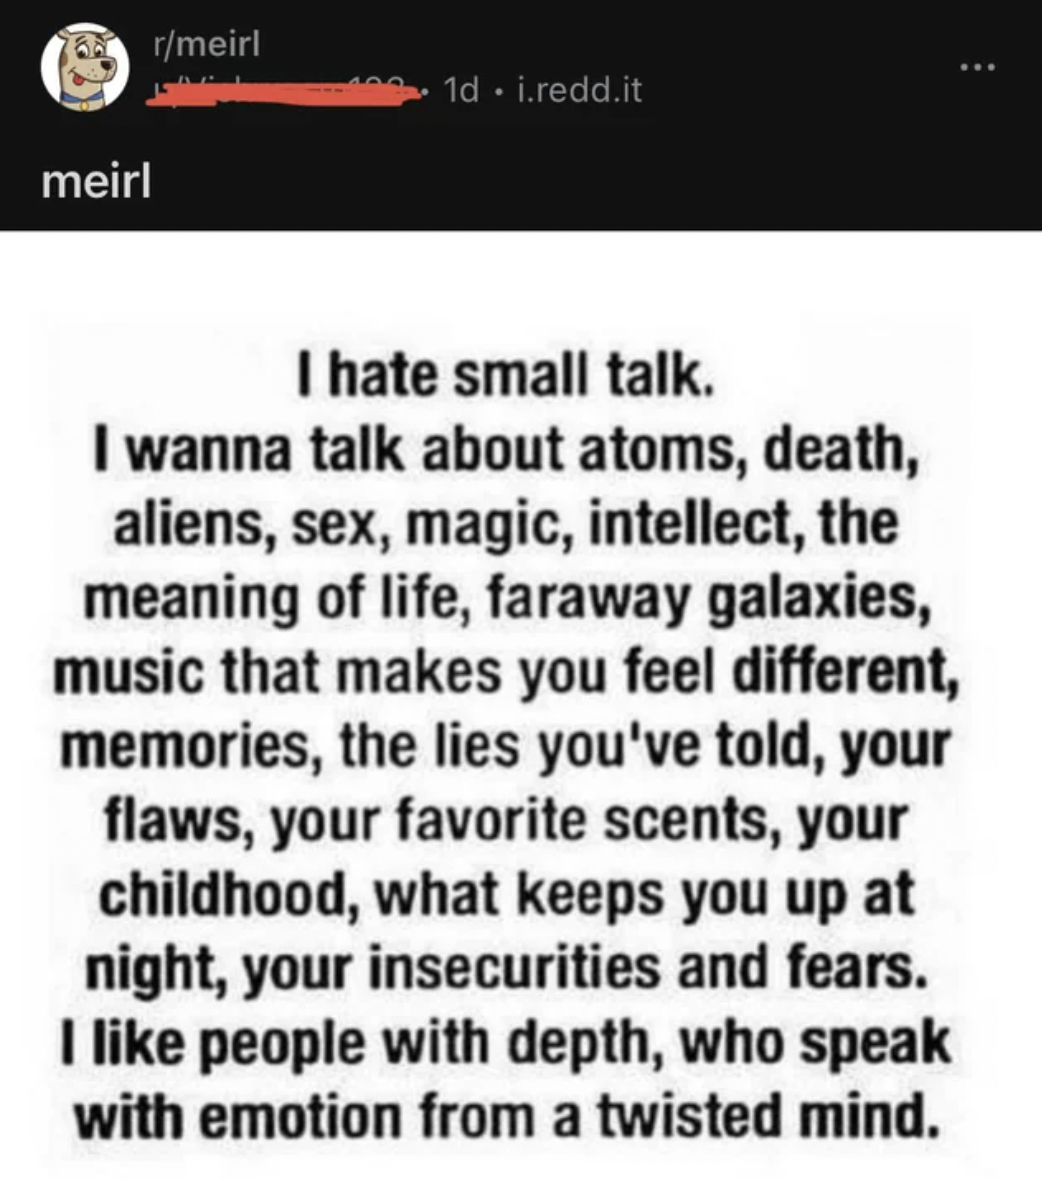 Cringe pics - wanna talk about atoms - 2 rmeirl meirl 1d. i.redd.it I hate small talk. I wanna talk about atoms, death, aliens, sex, magic, intellect, the meaning of life, faraway galaxies, music that makes you feel different, memories, the lies you've to